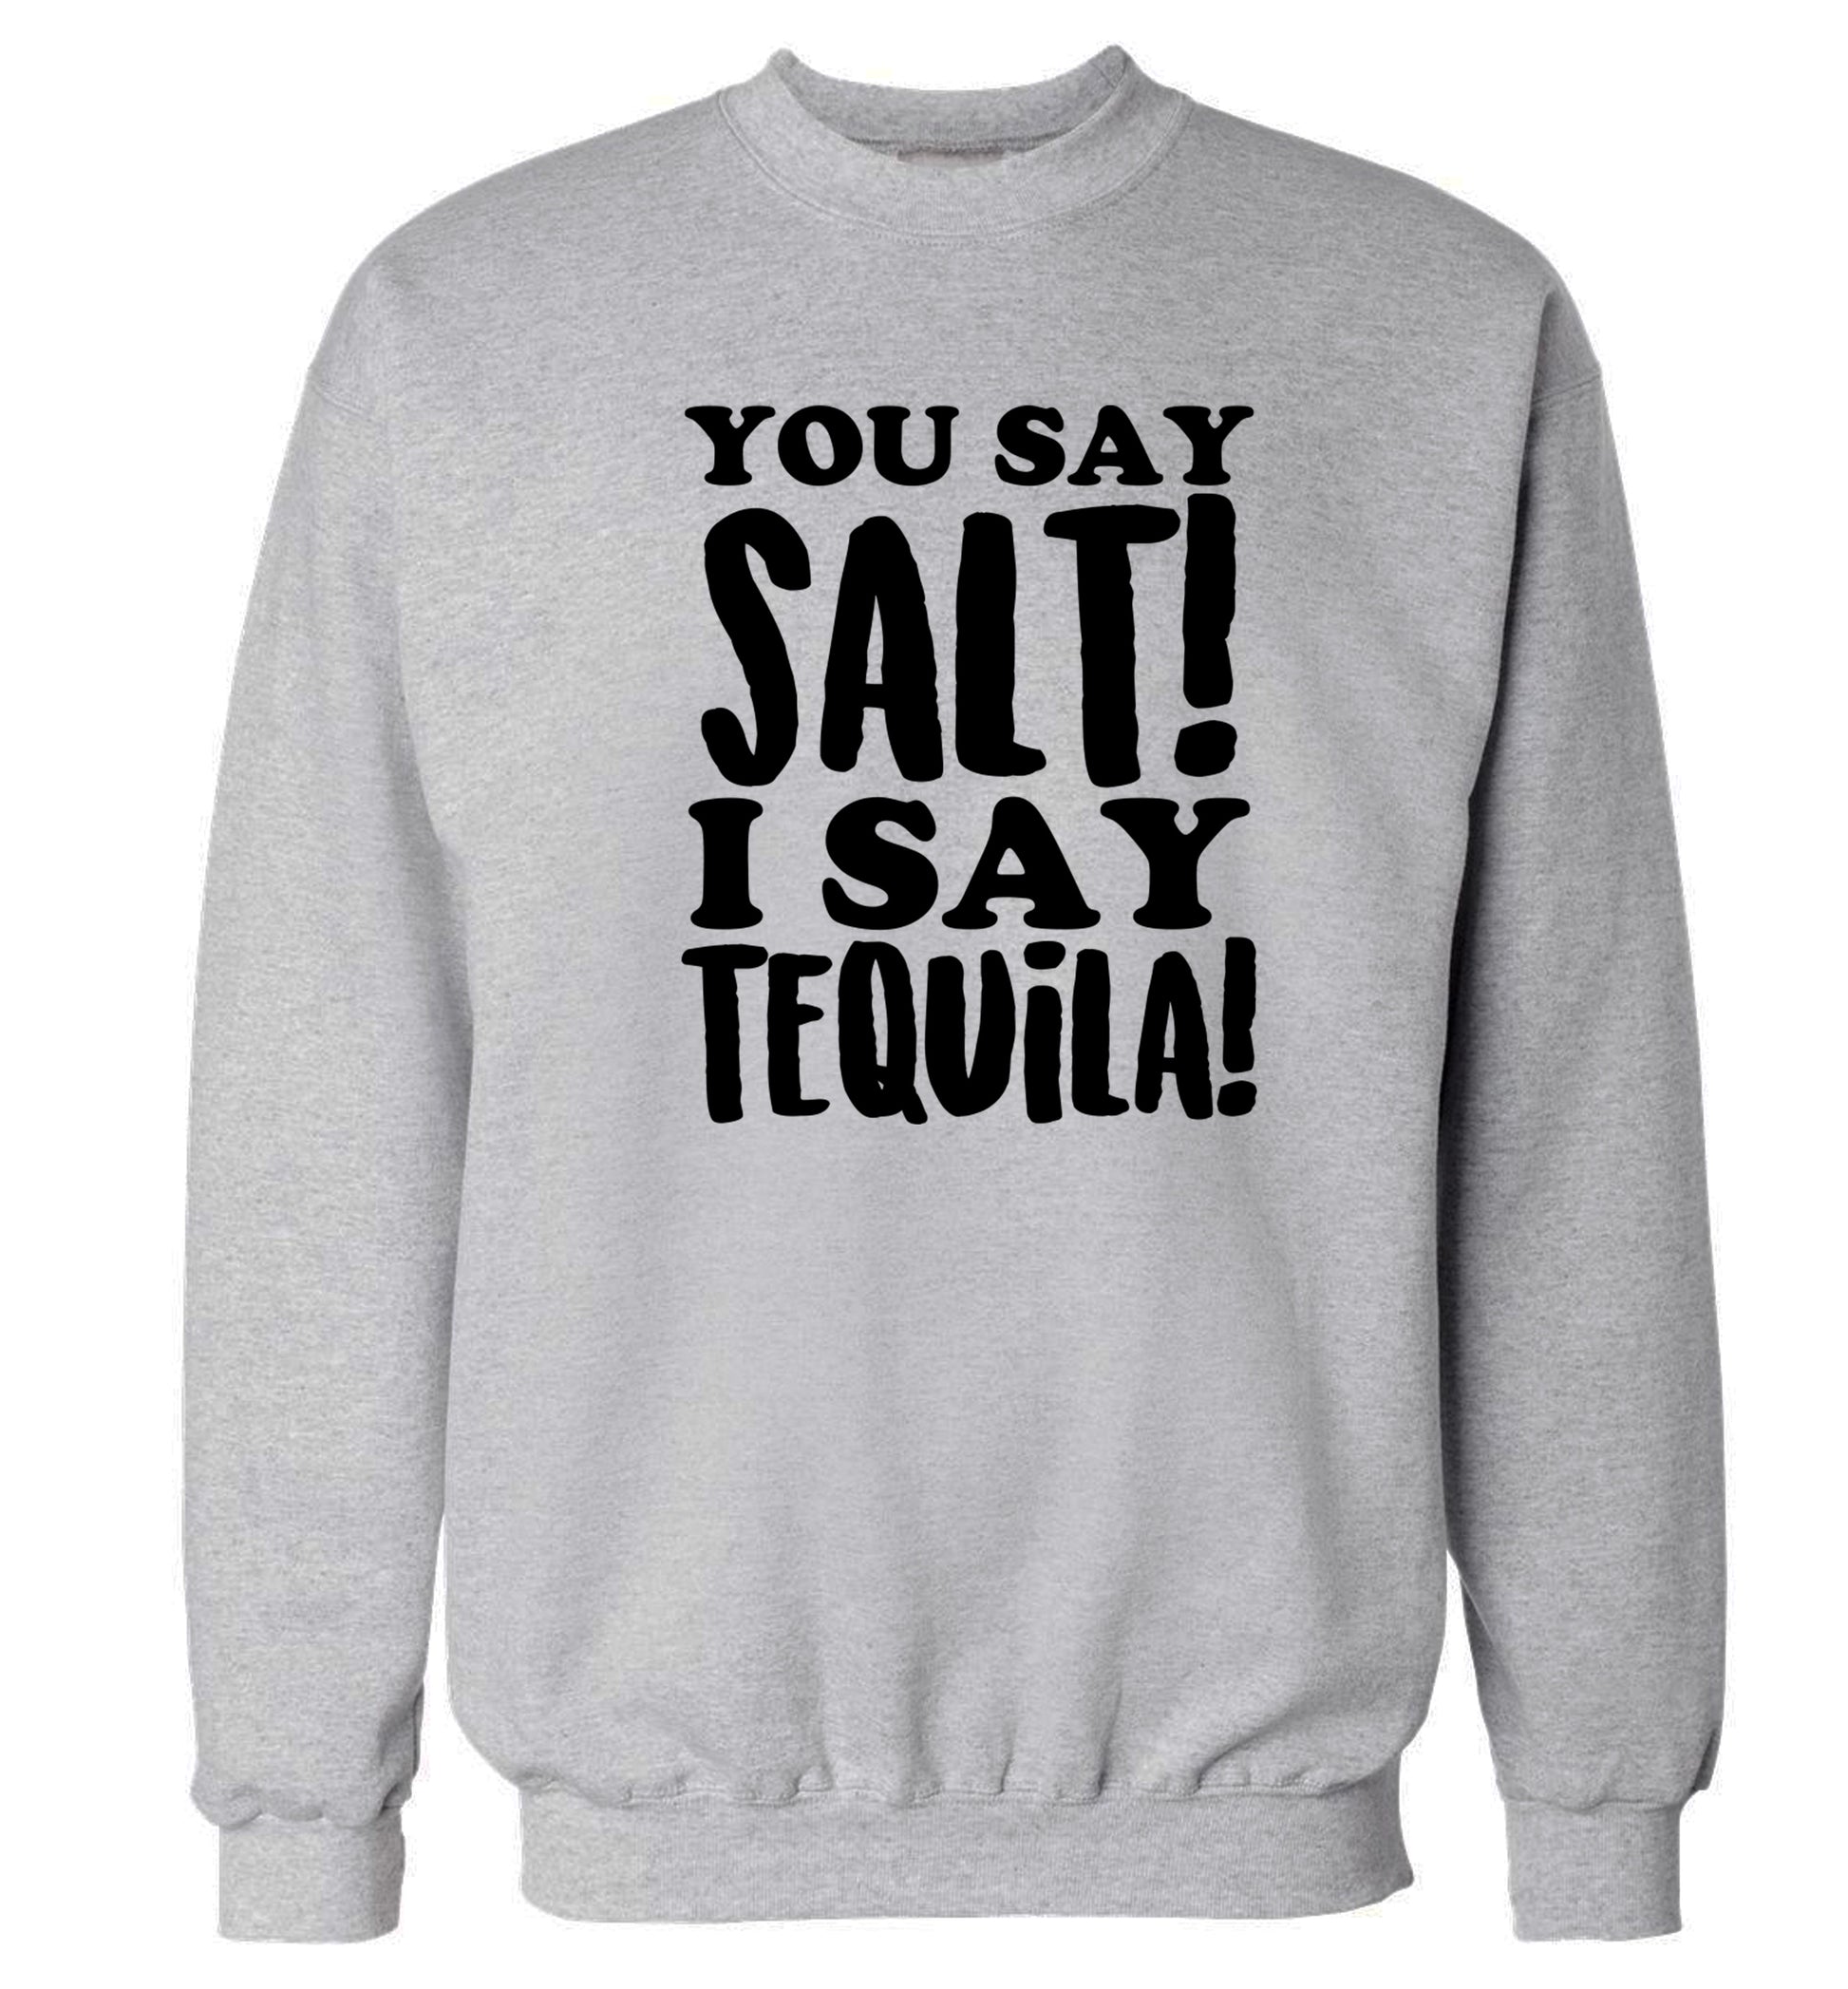 You say salt I say tequila Adult's unisex grey Sweater 2XL